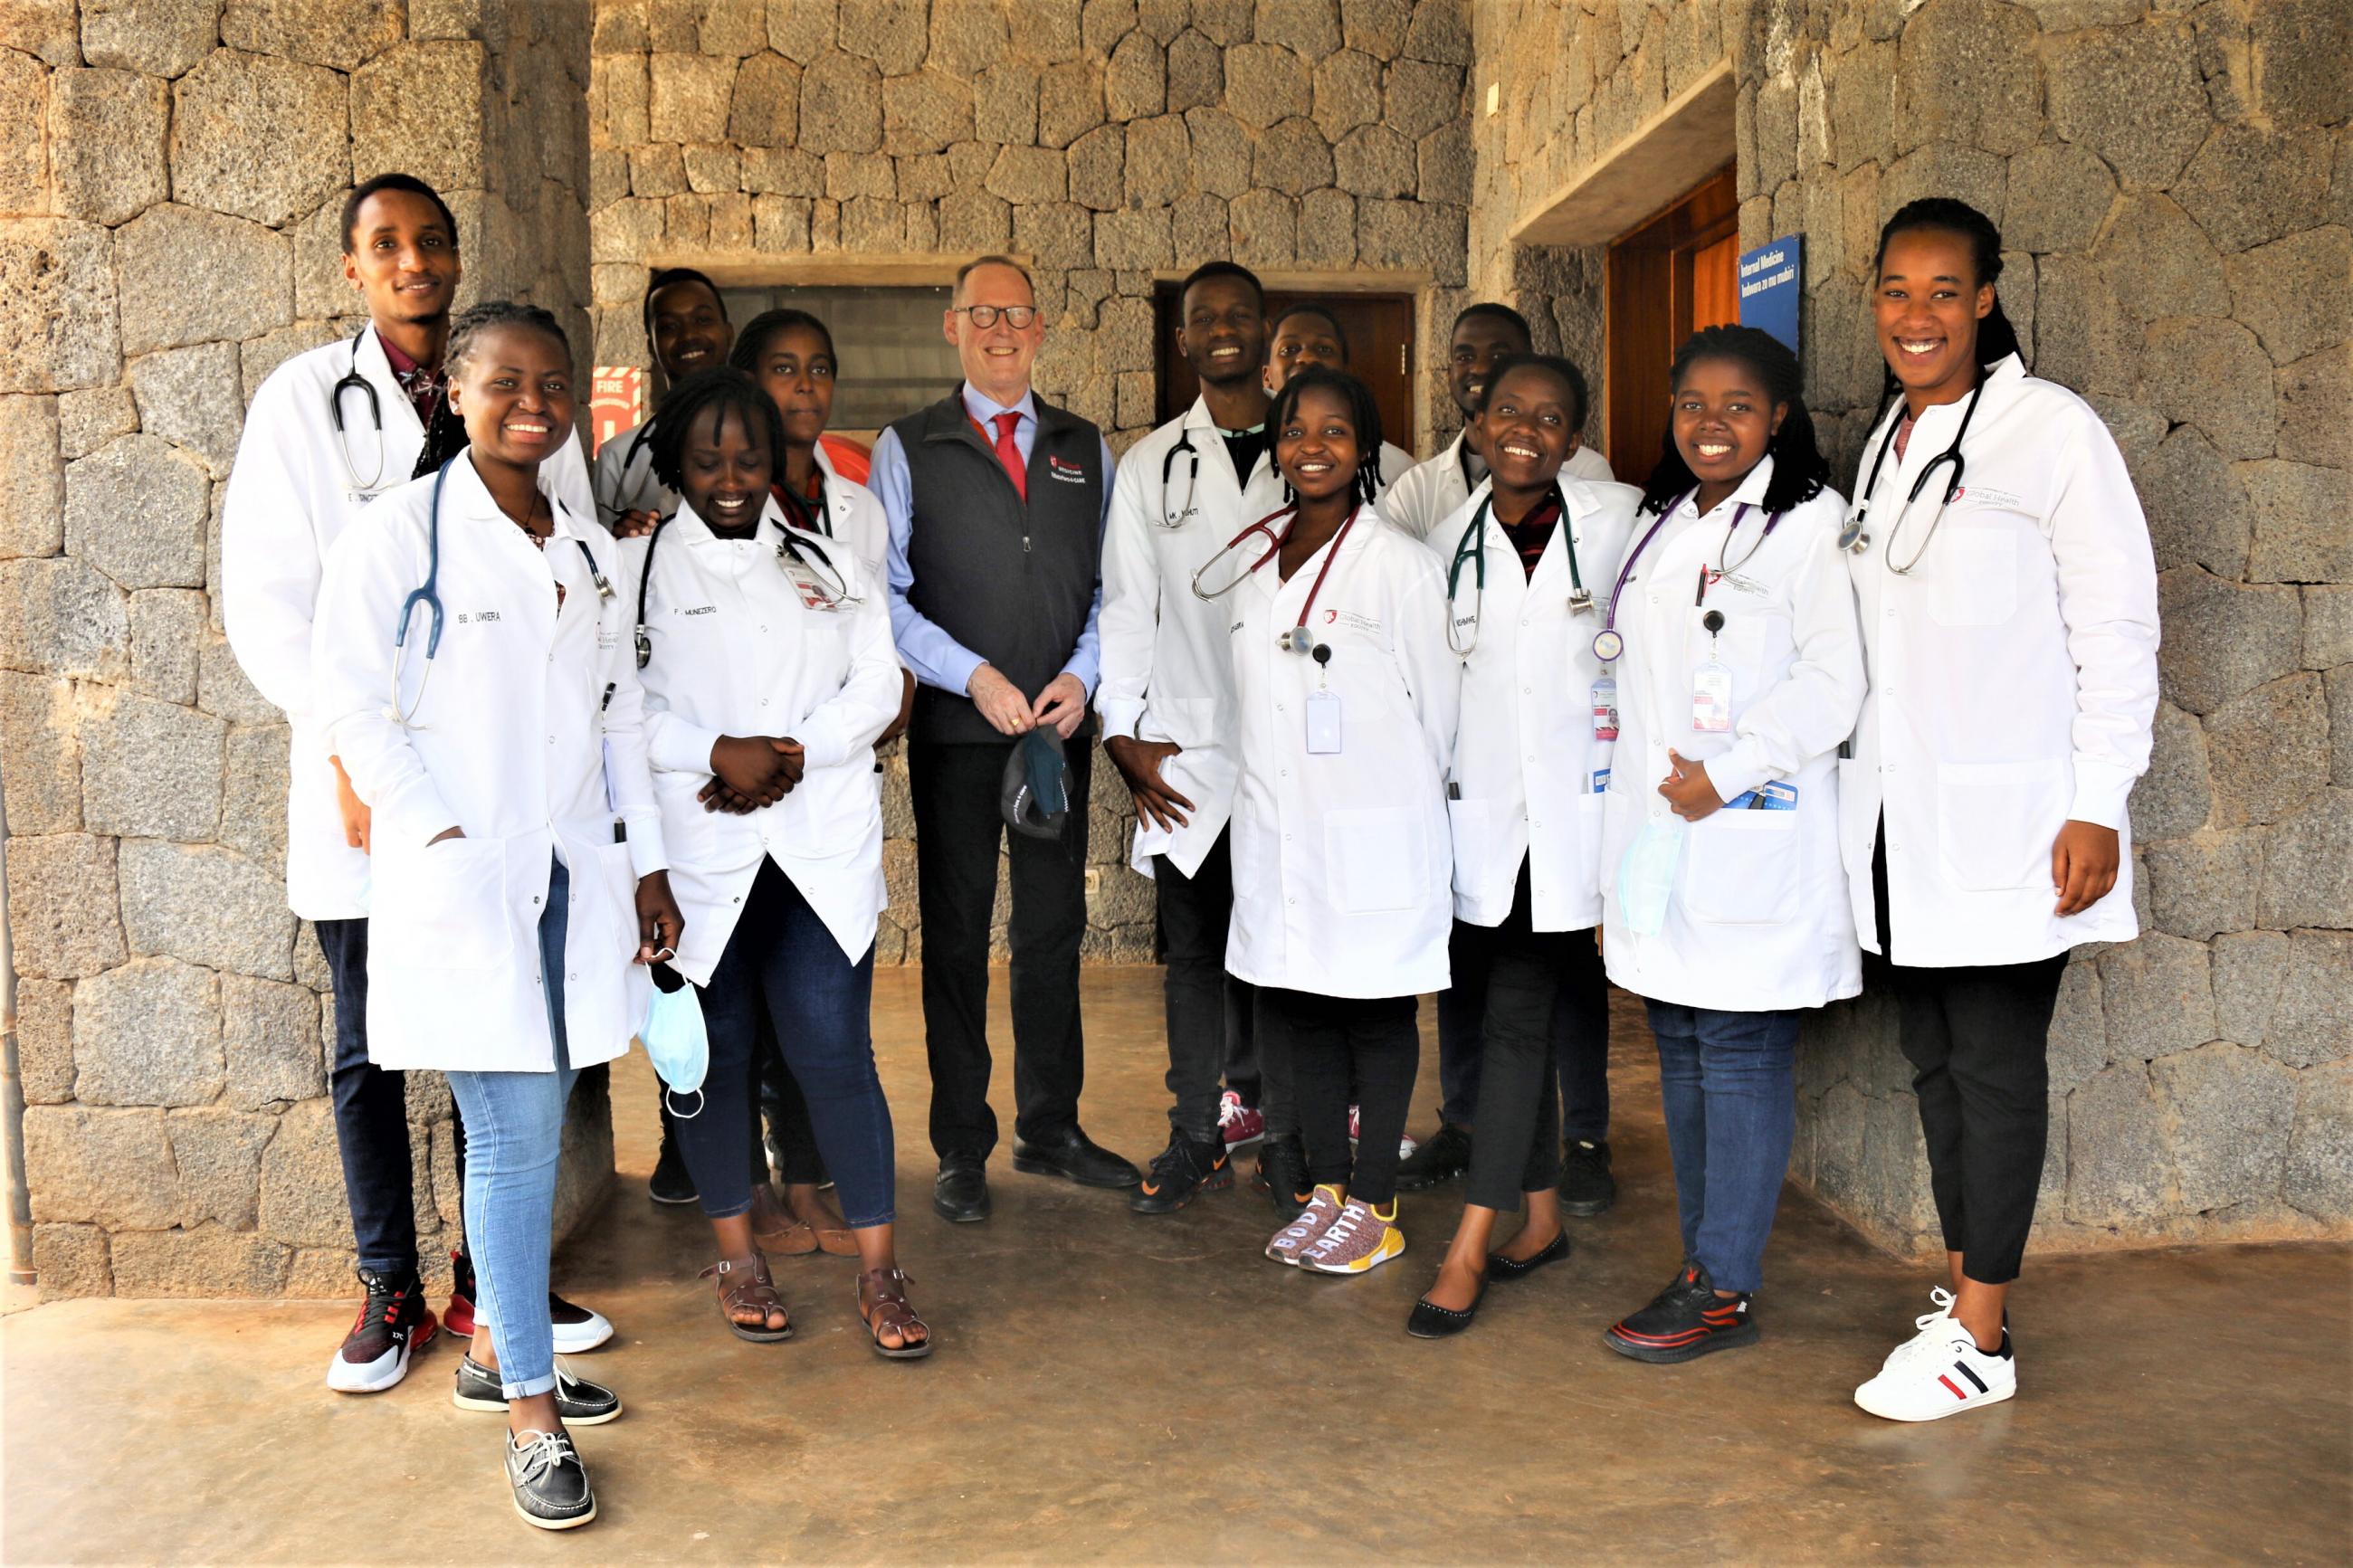 Paul Farmer on rounds at Butaro District Hospital. 